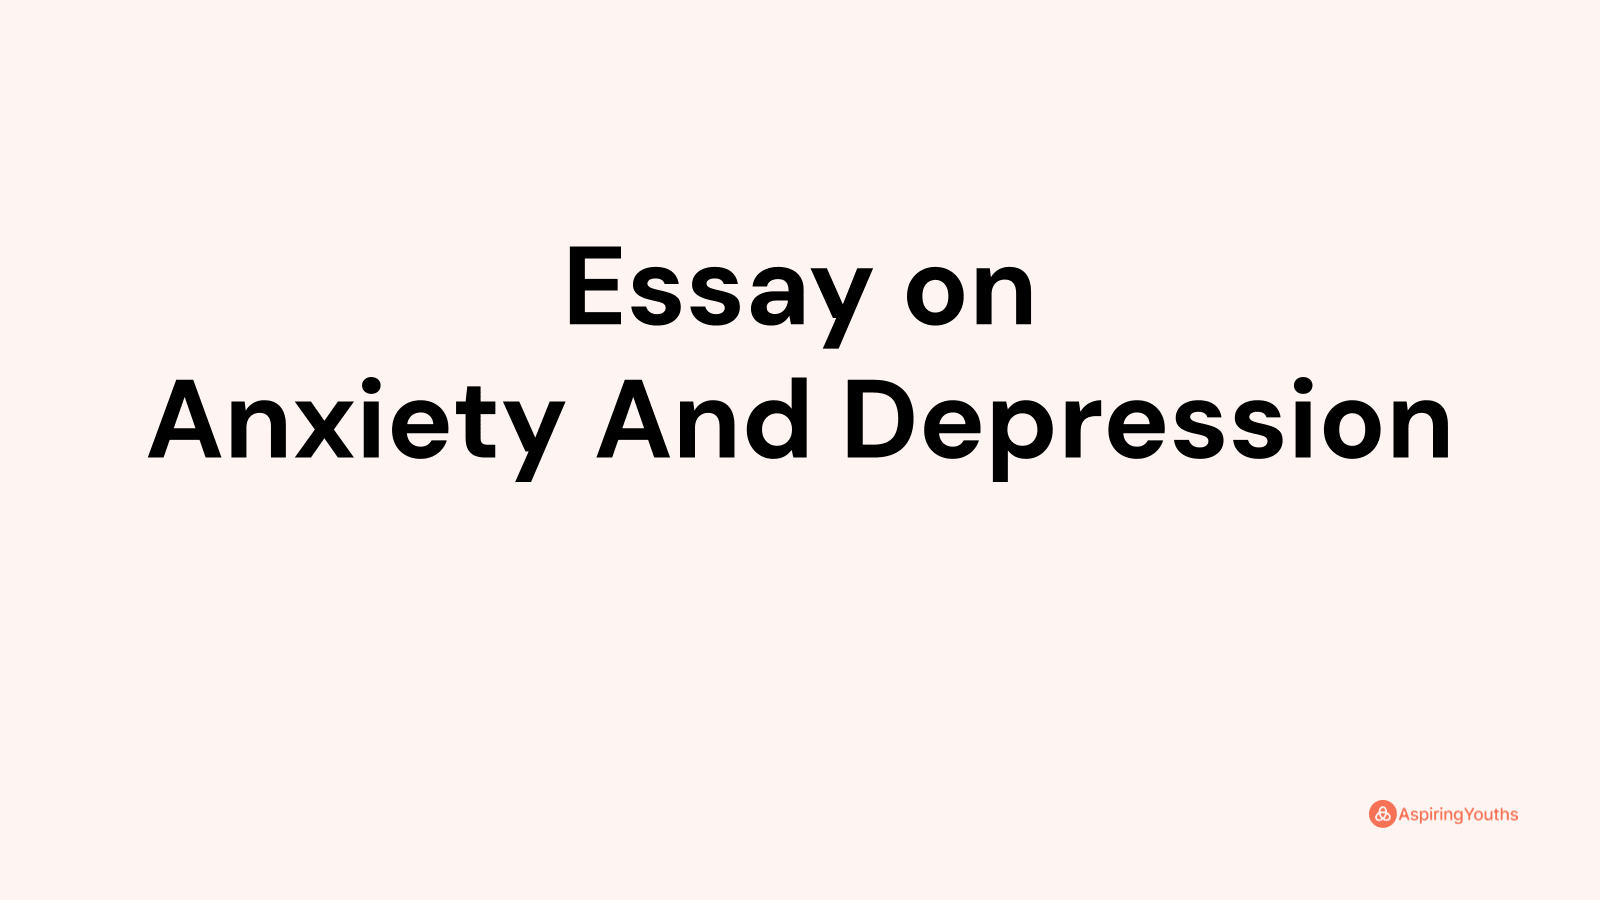 Essay on Anxiety And Depression